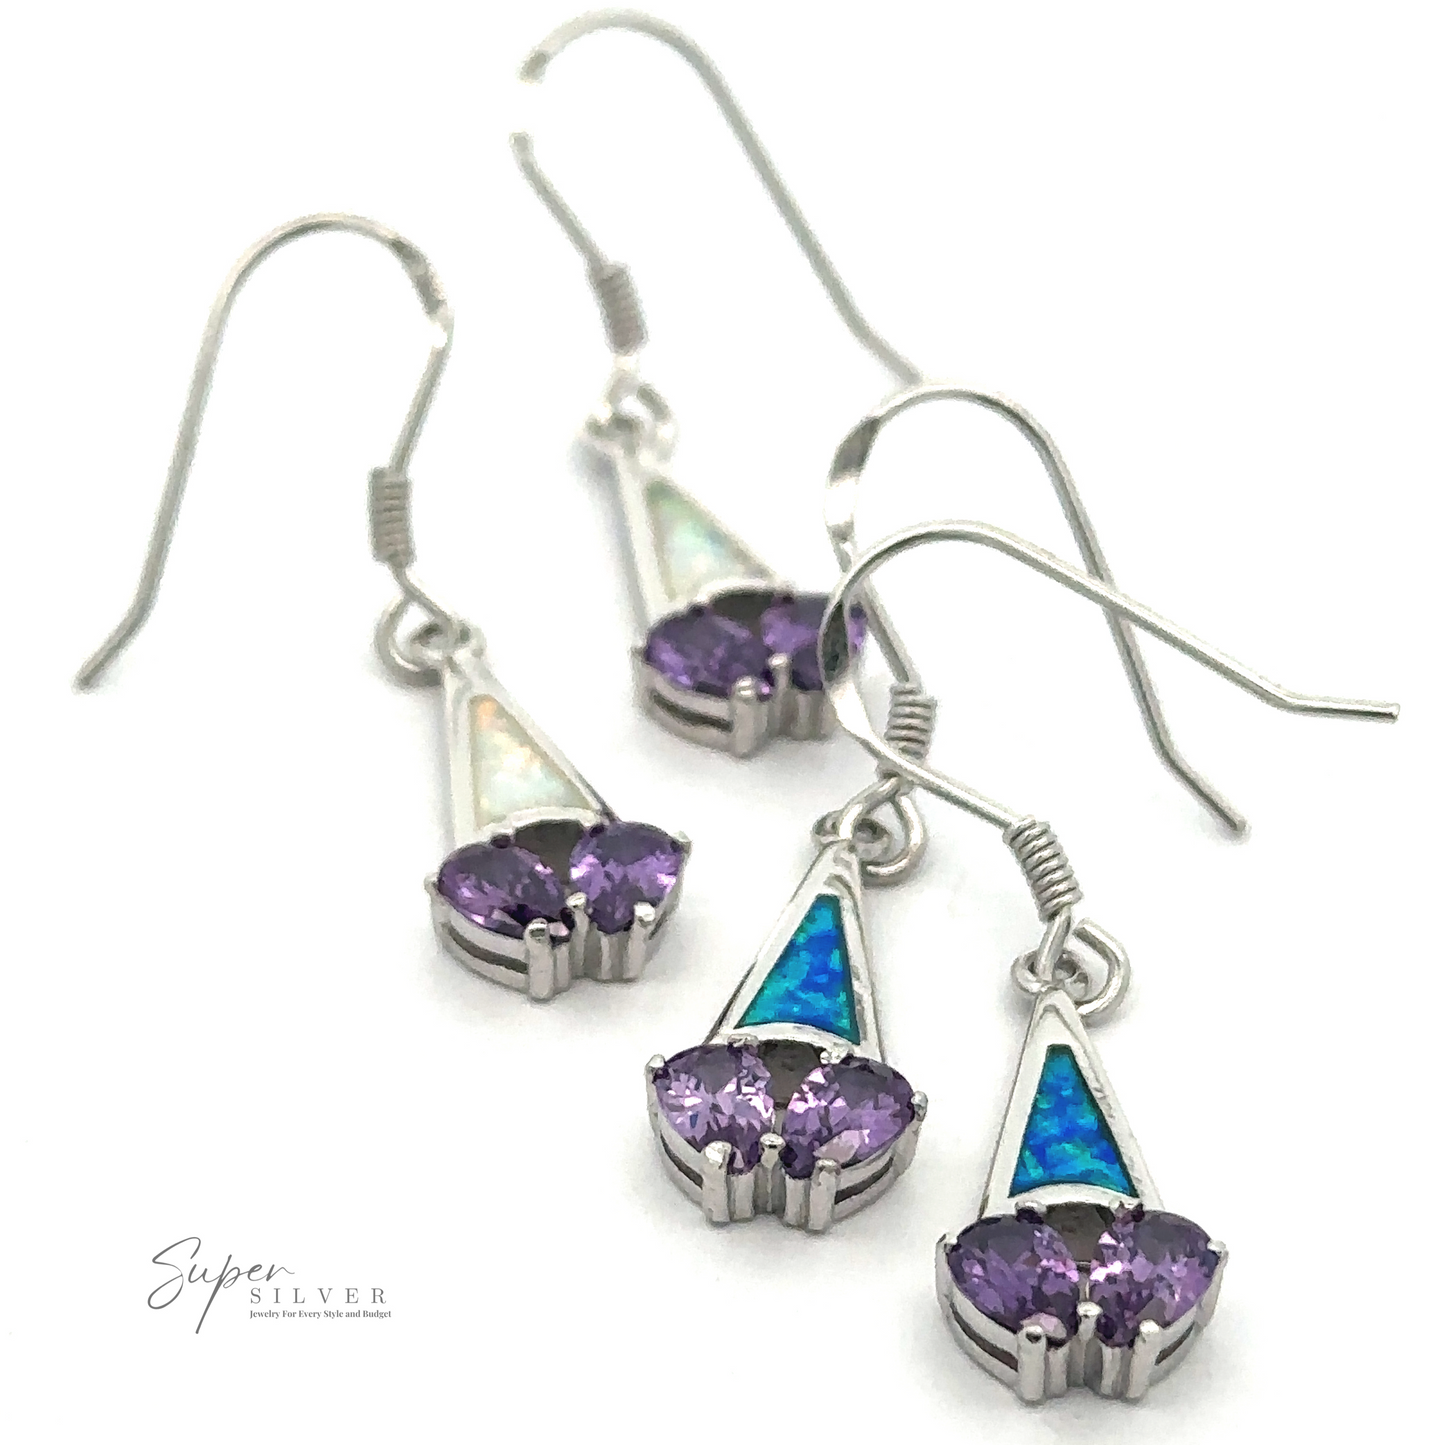 
                  
                    Four Created Opal Earrings with Purple Cubic Zirconia, featuring purple CZ stone and iridescent triangle inlays. Background is white. "Super Silver" logo visible.
                  
                